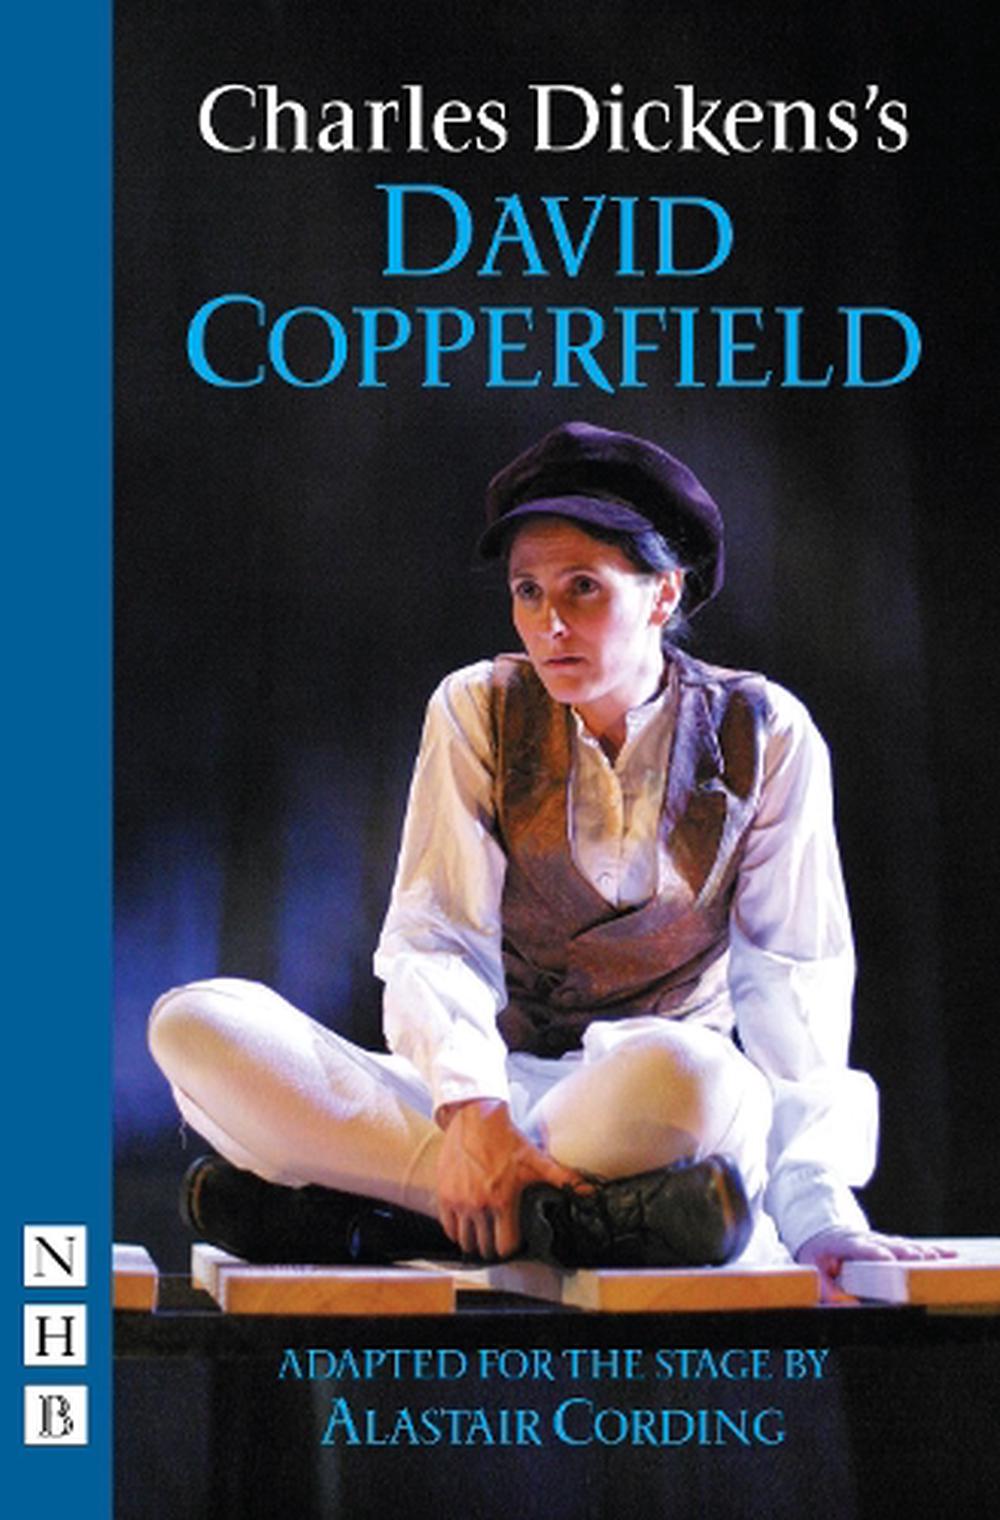 book review david copperfield